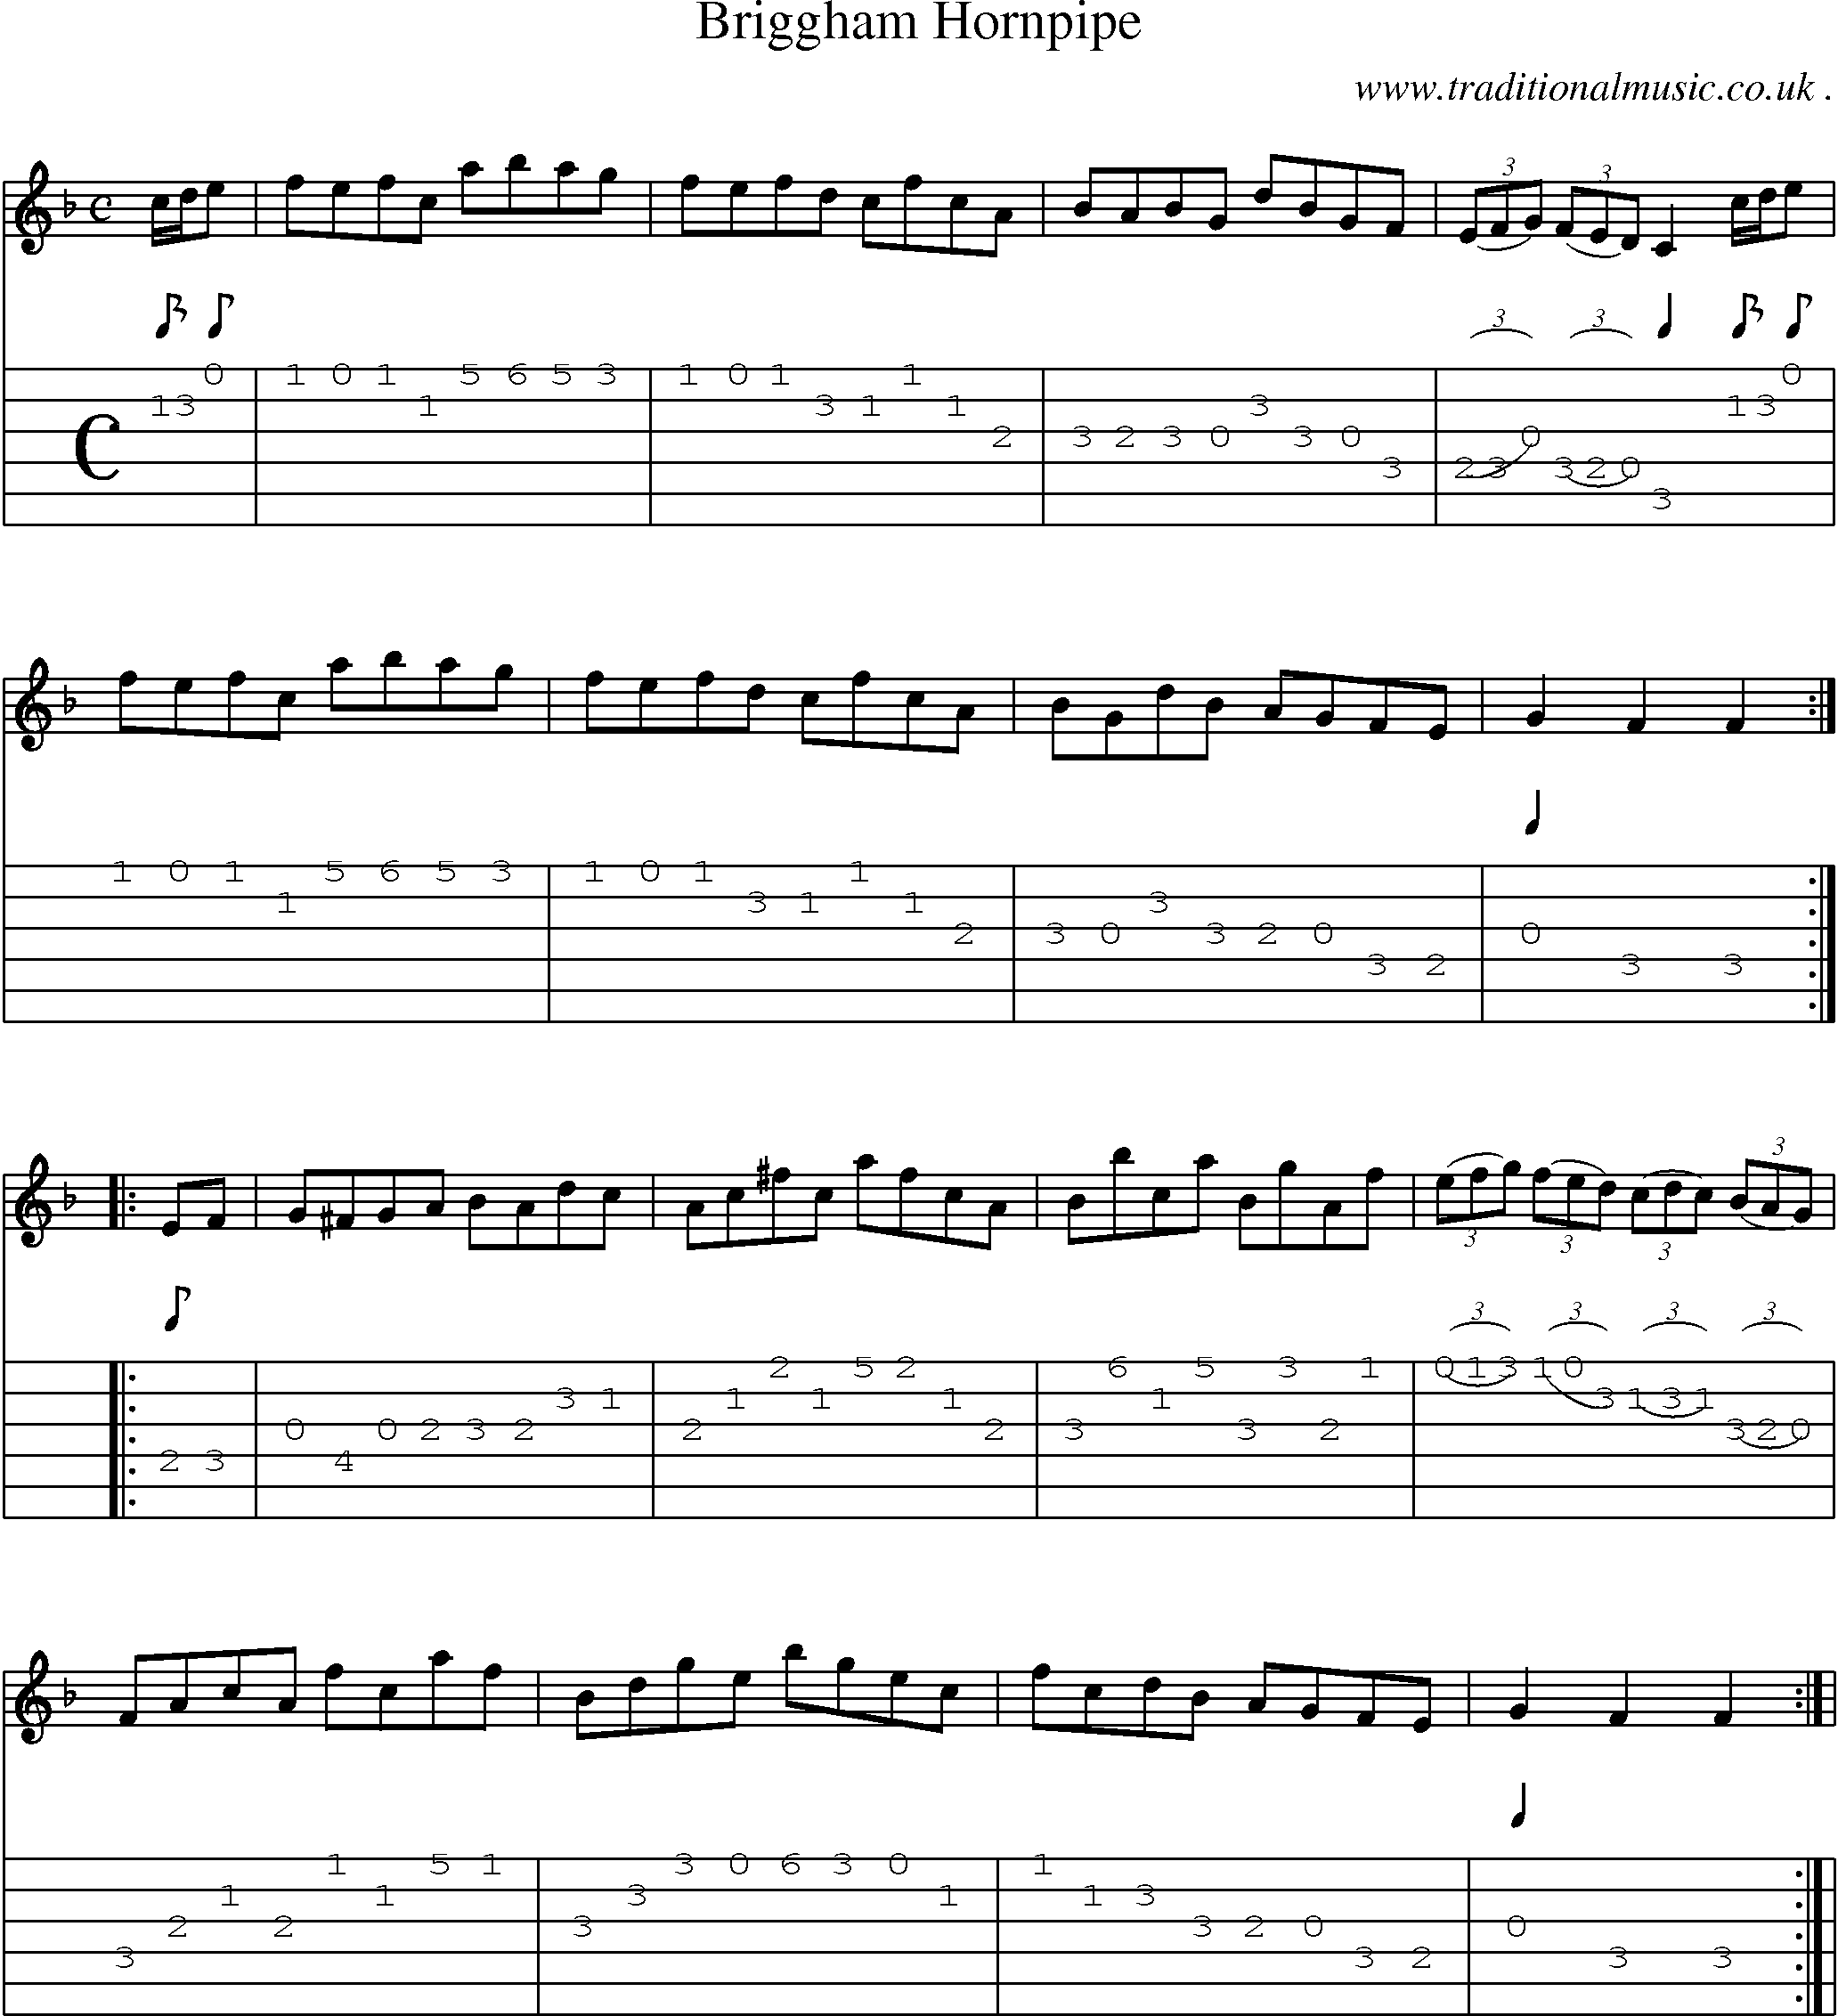 Sheet-Music and Guitar Tabs for Briggham Hornpipe